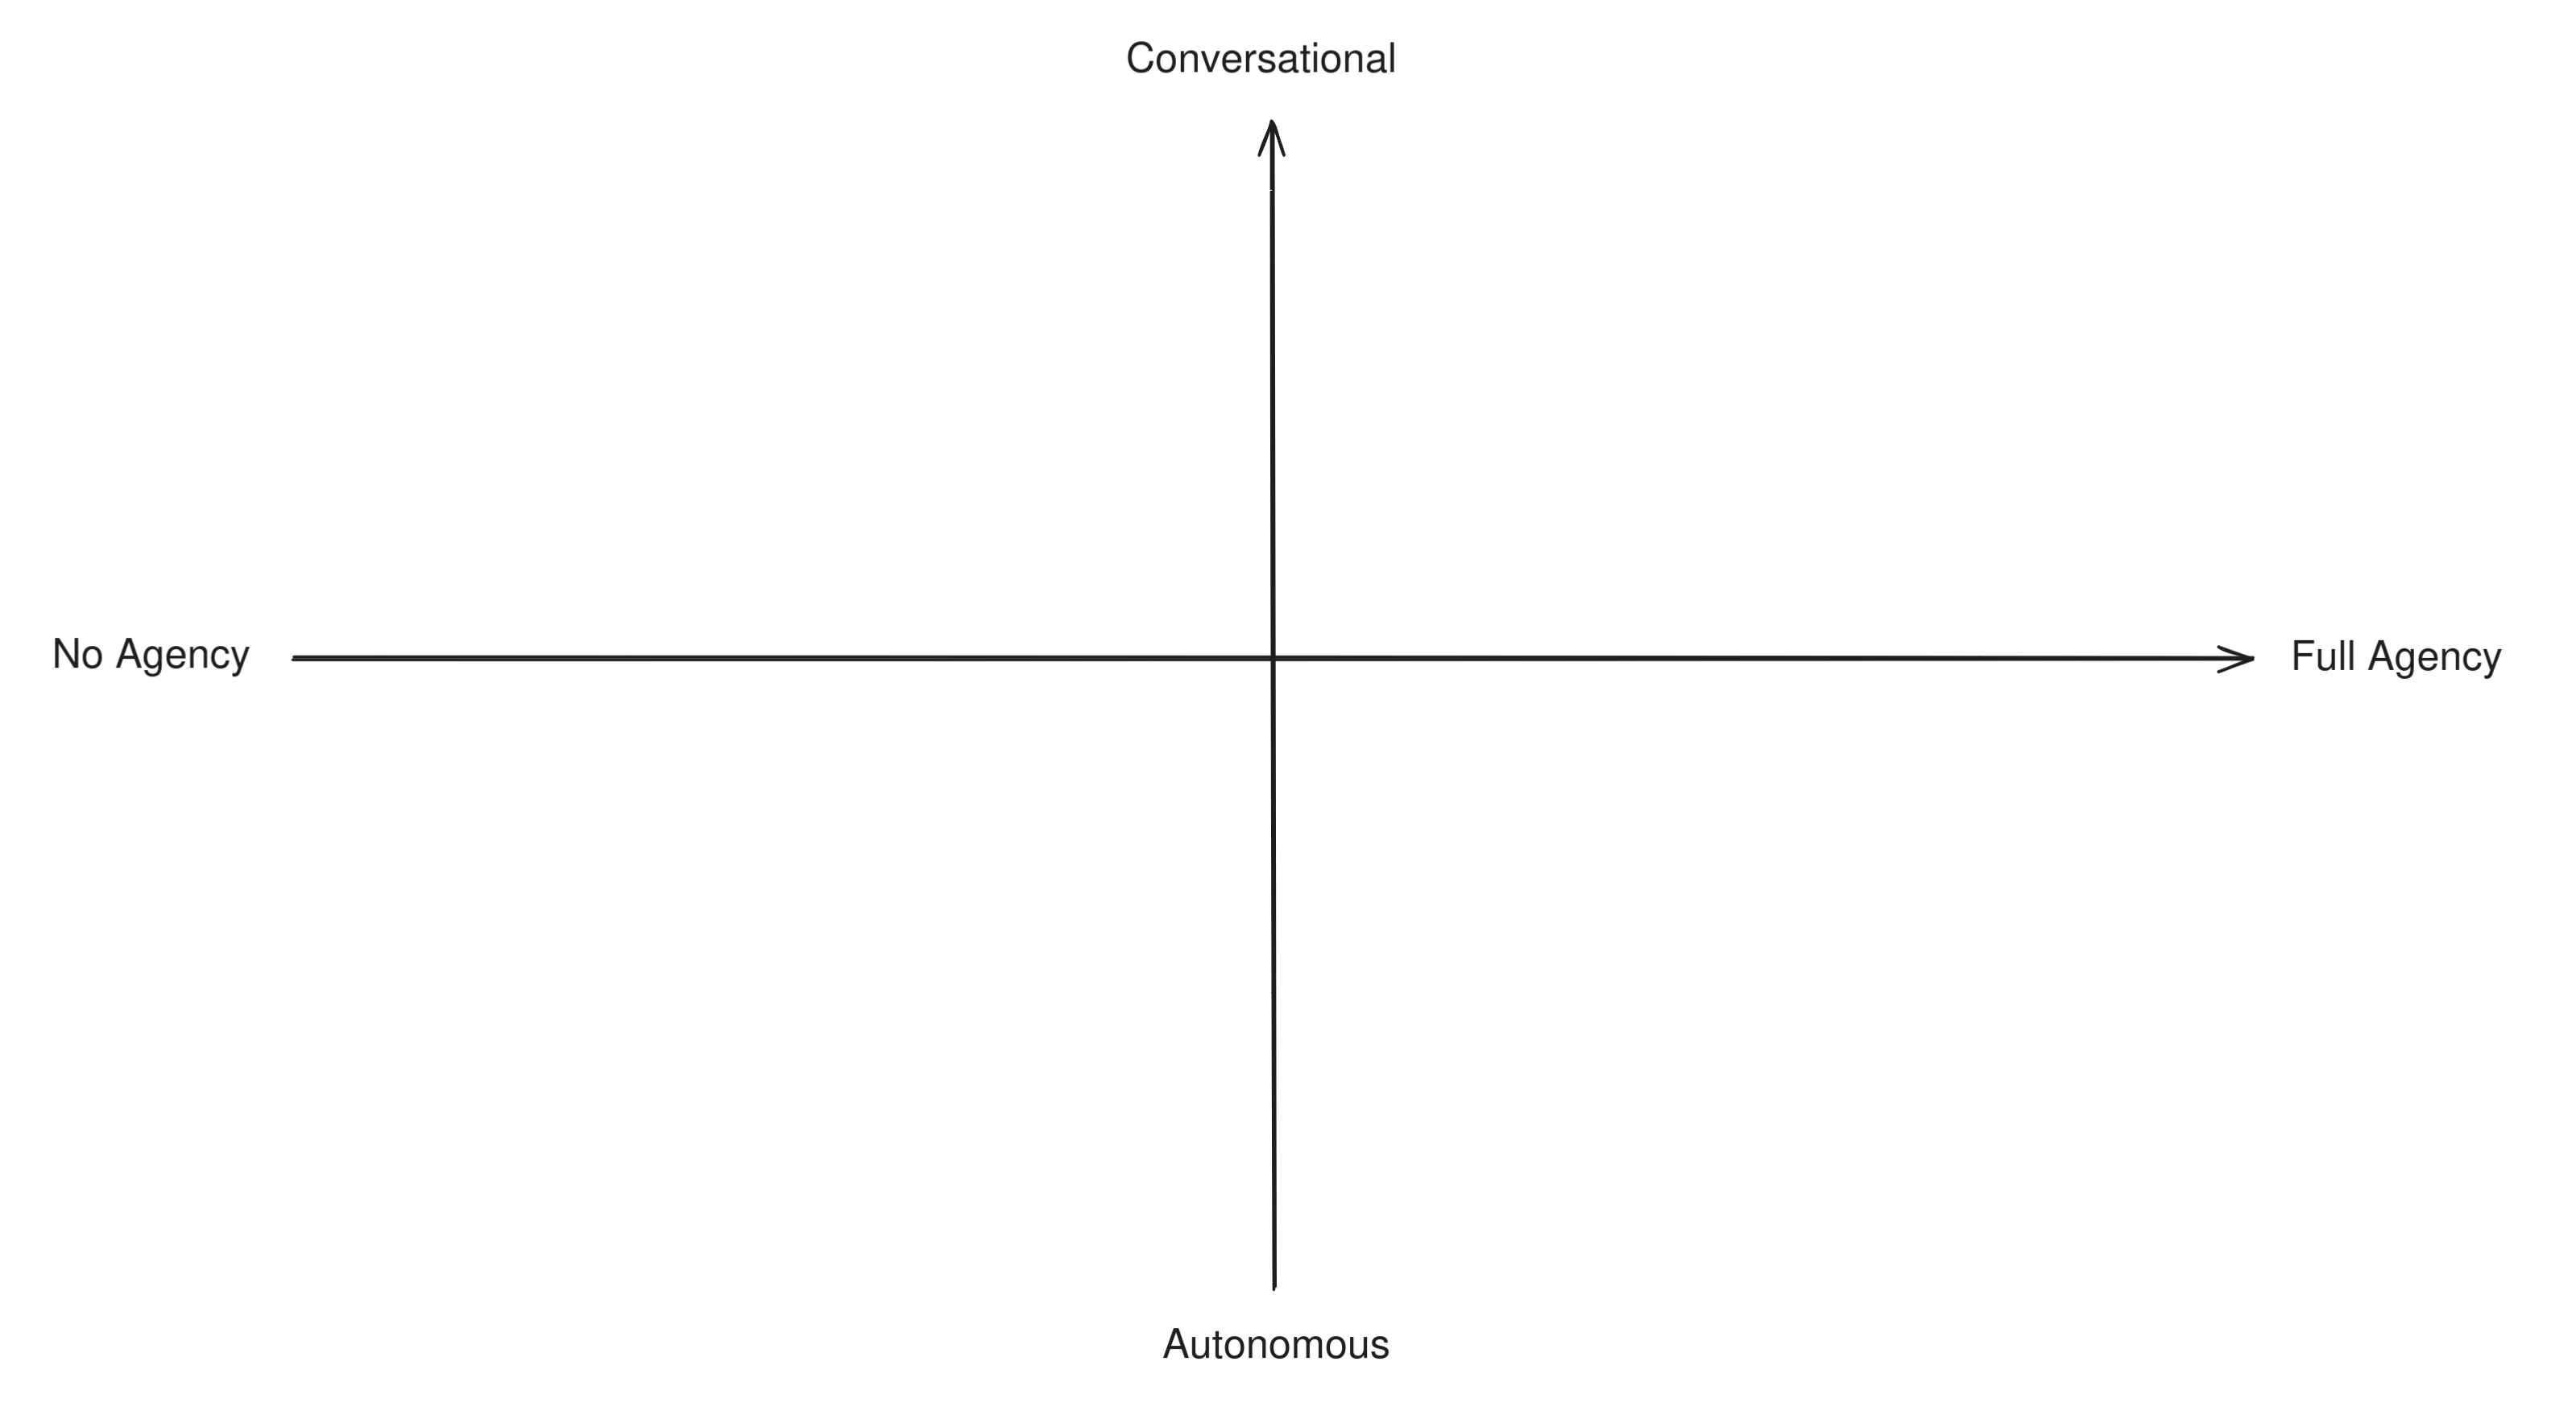 a compass with two axis: no agency (left) to full agency (right) on the horizontal axis, and autonomous (bottom) to conversational (top) on the vertical axis.